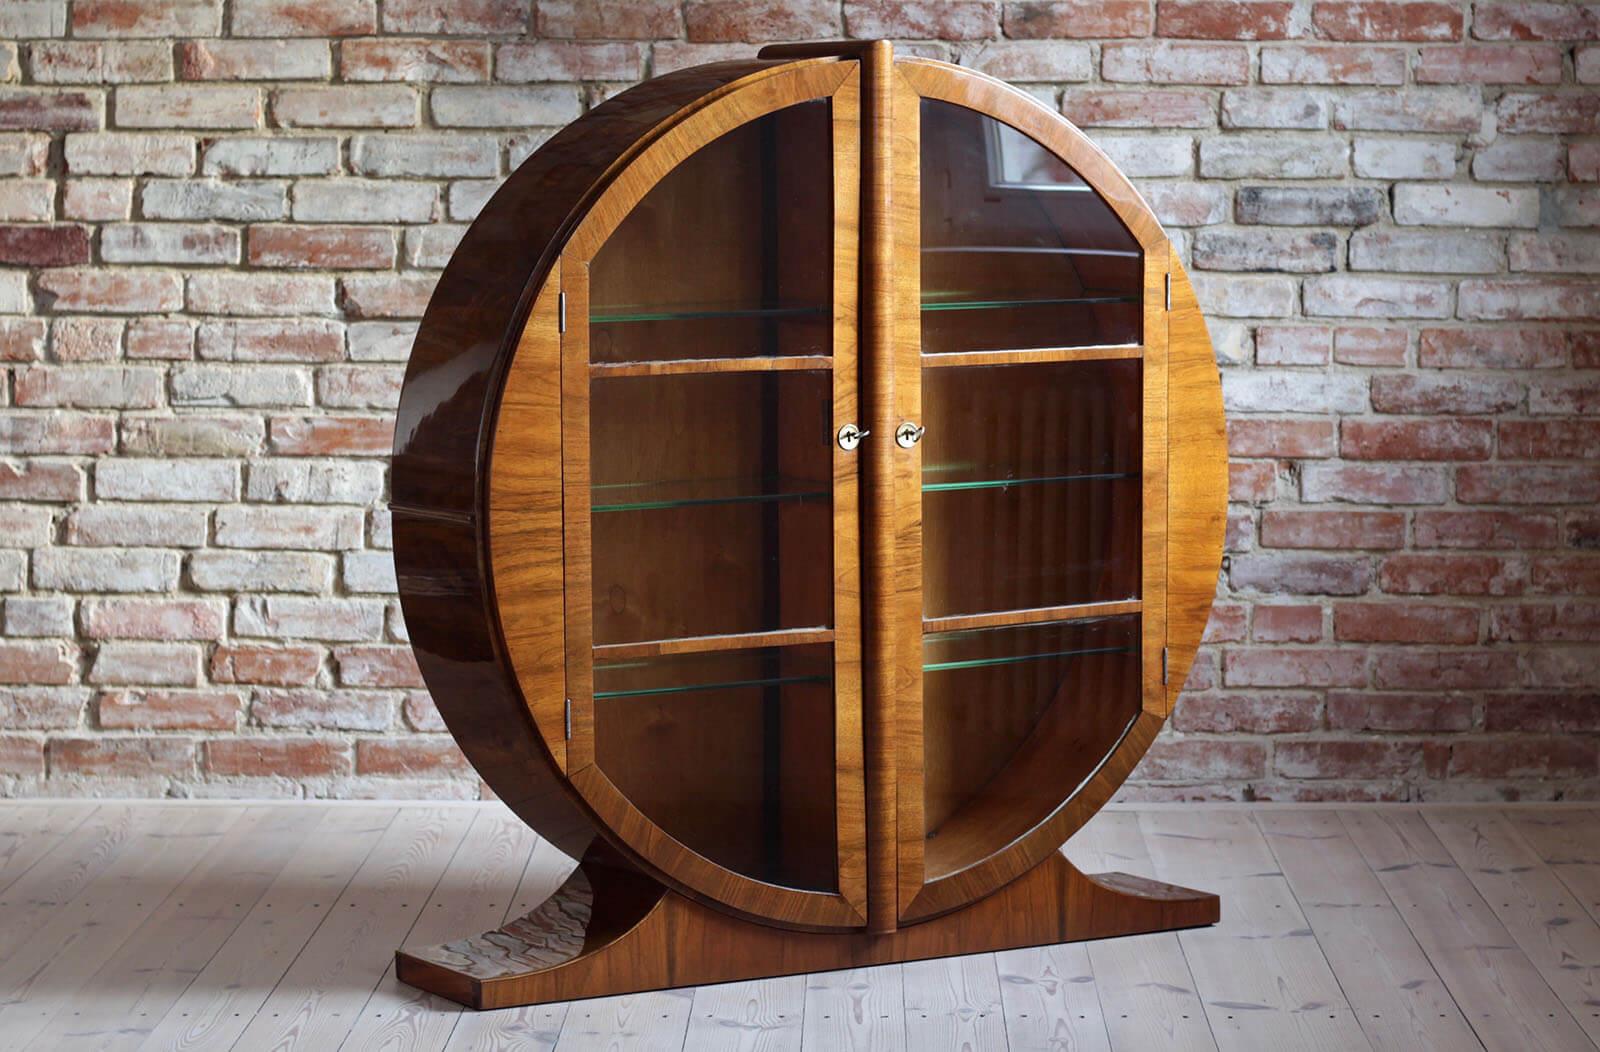 English Art Deco round display cabinet from circa 1930s-1950s. The piece is veneered with walnut veneer in a warm mid-tone coloring and features a generously sized interior display area for all your collection. On each side there are 3 glass